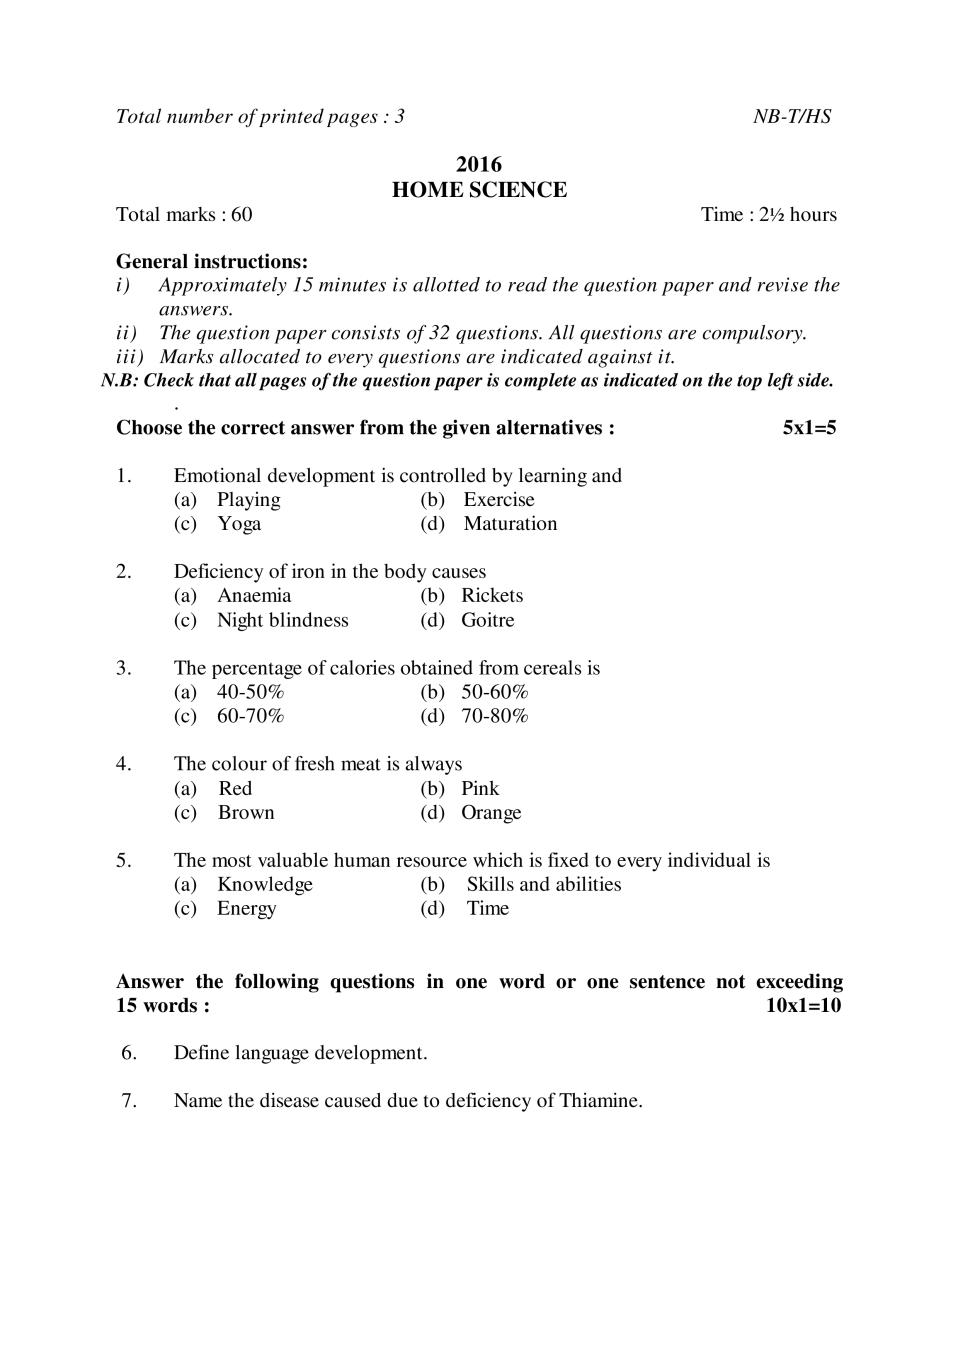 NBSE Class 10 Question Paper 2016 for HomeScience - Page 1